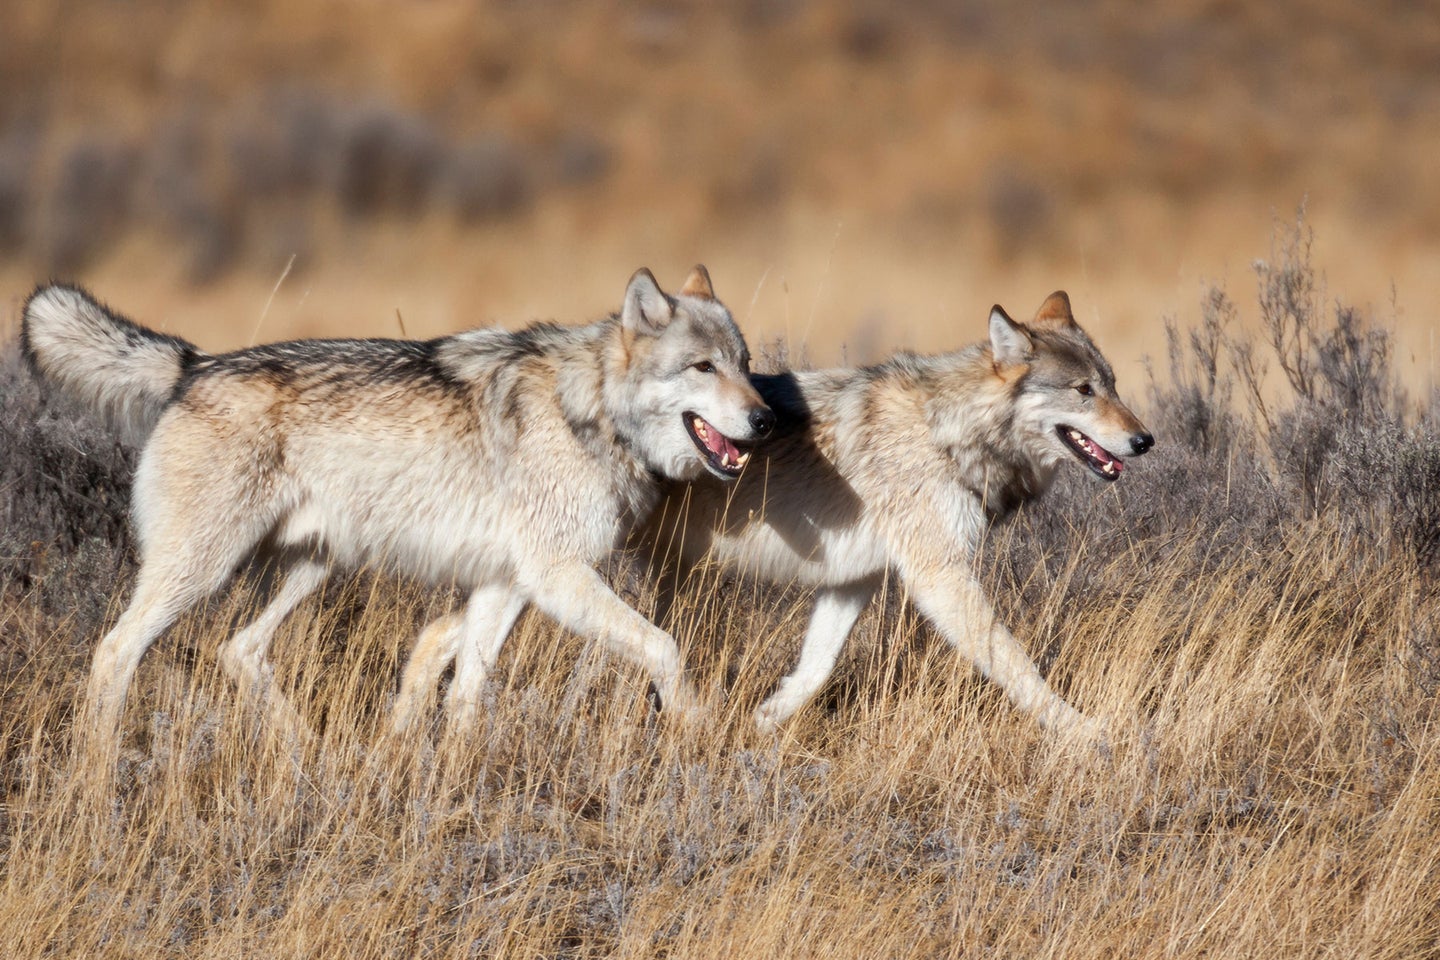 Two gray wolves walk together through a field.